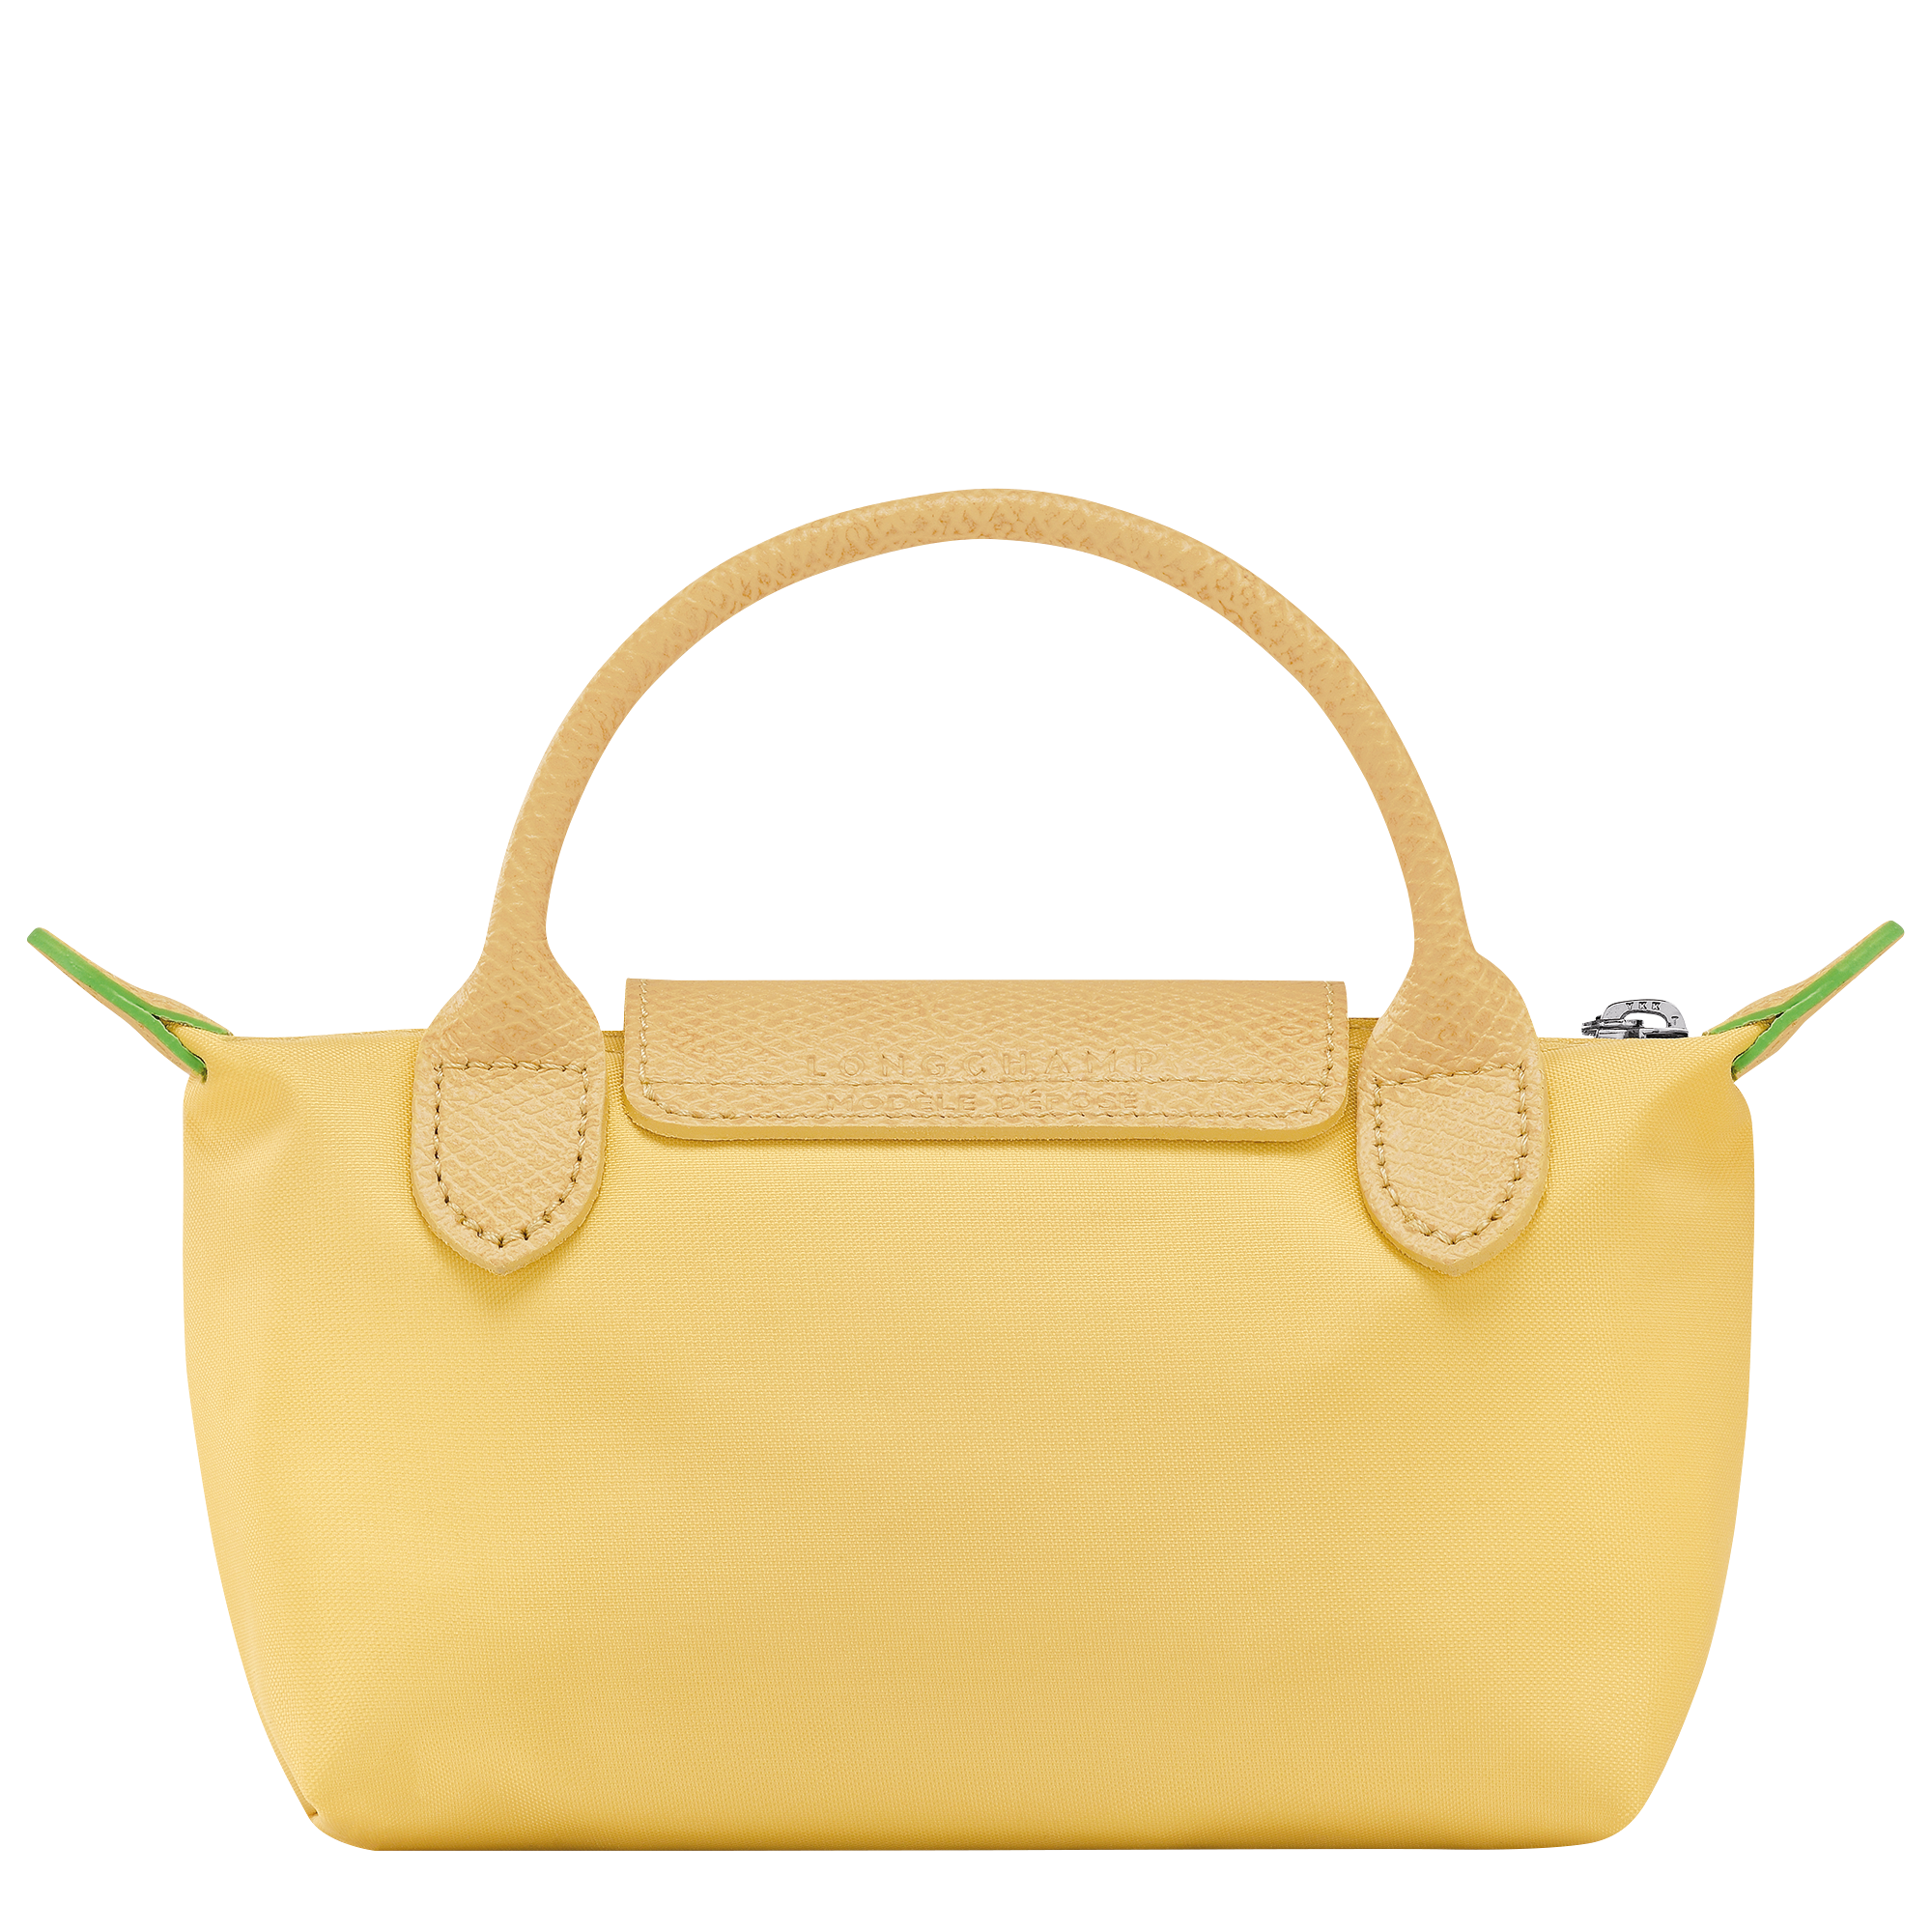 Longchamp LE PLIAGE GREEN - Pouch with handle in Wheat - 3 (SKU: 34175919A81)